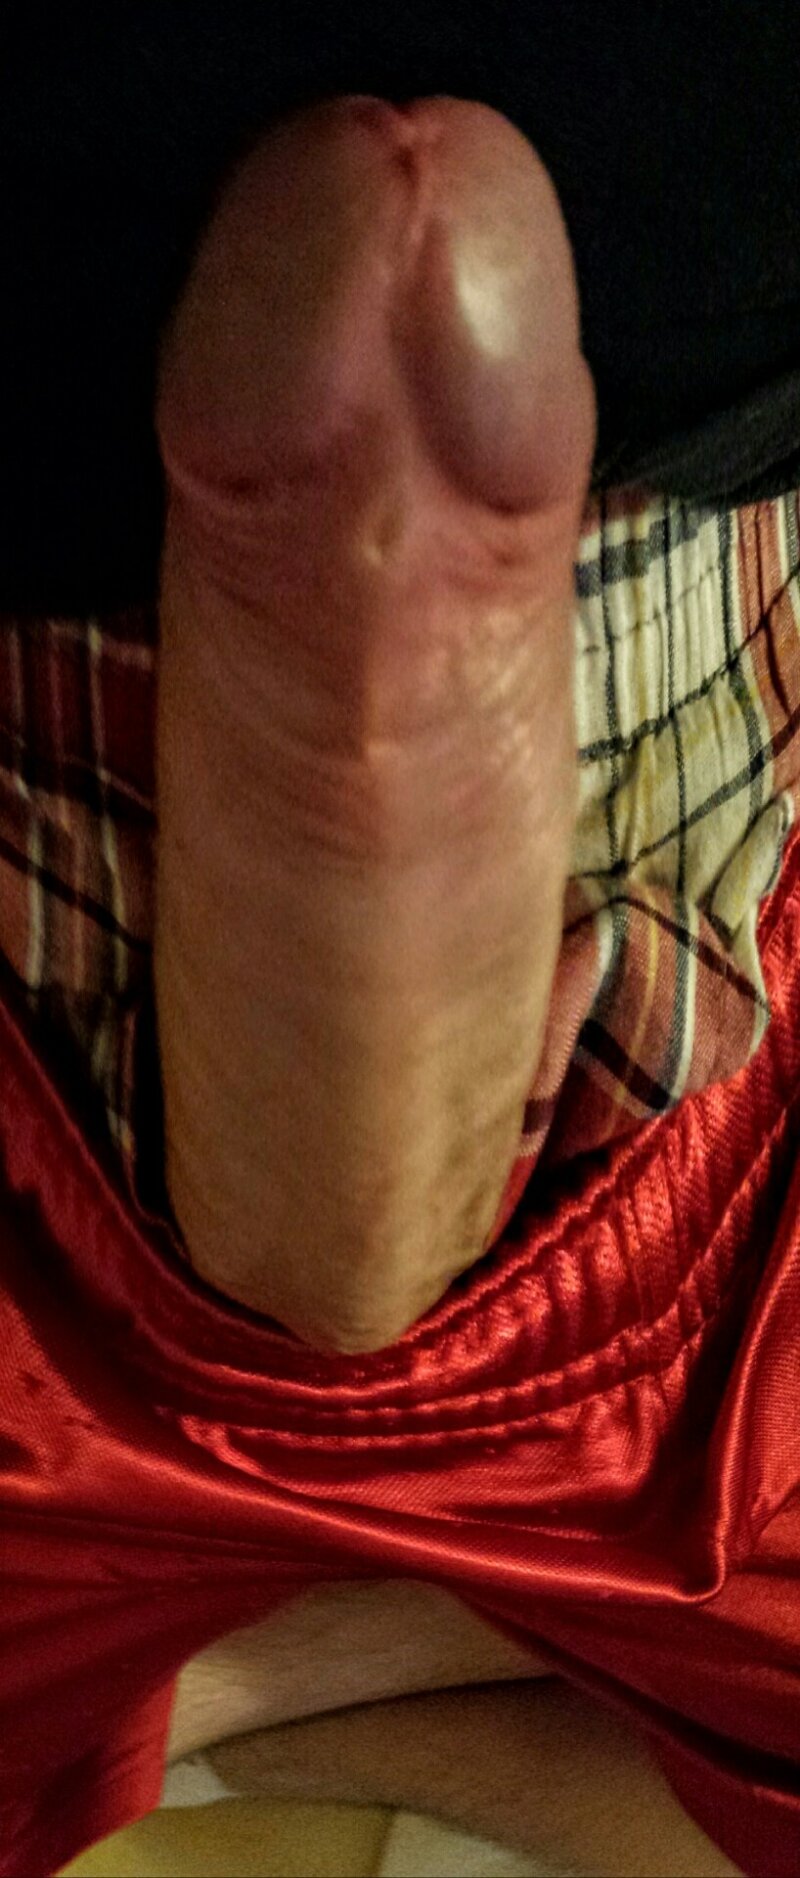 Thats my cock... picture